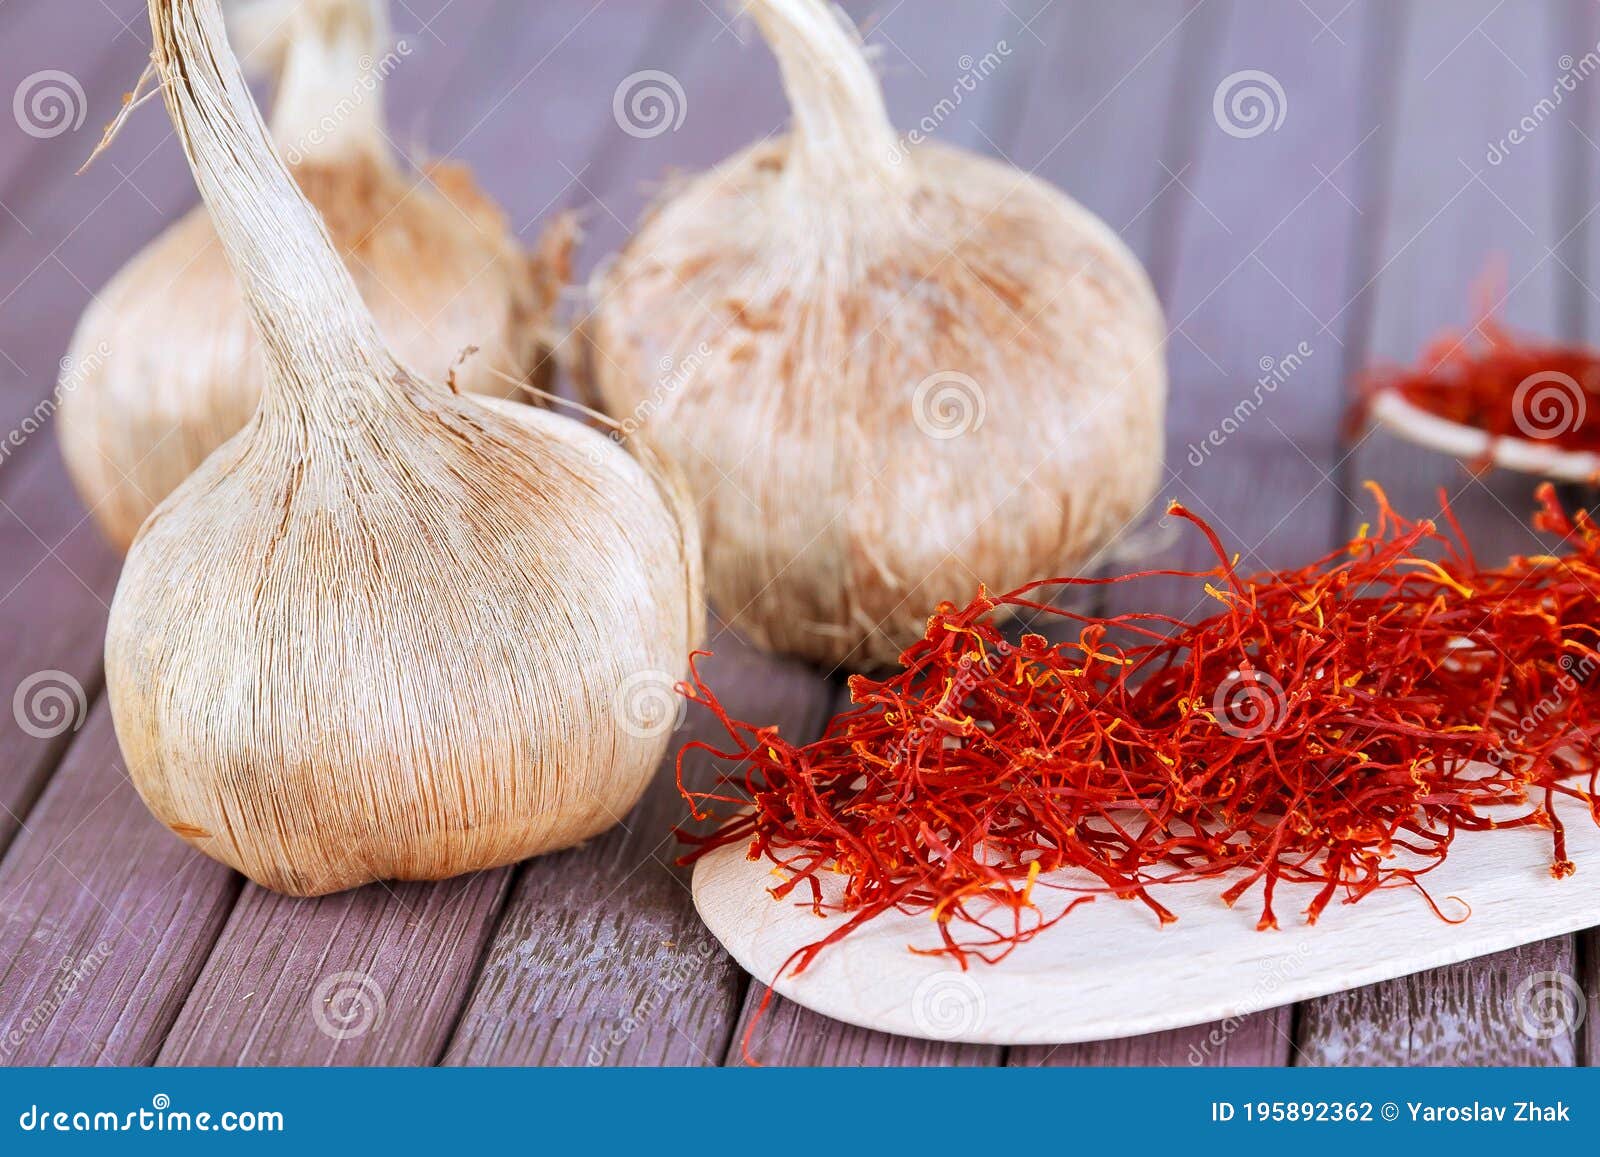 bulbs of crocus sativus, dry spice saffron in wooden spoon on a wooden background